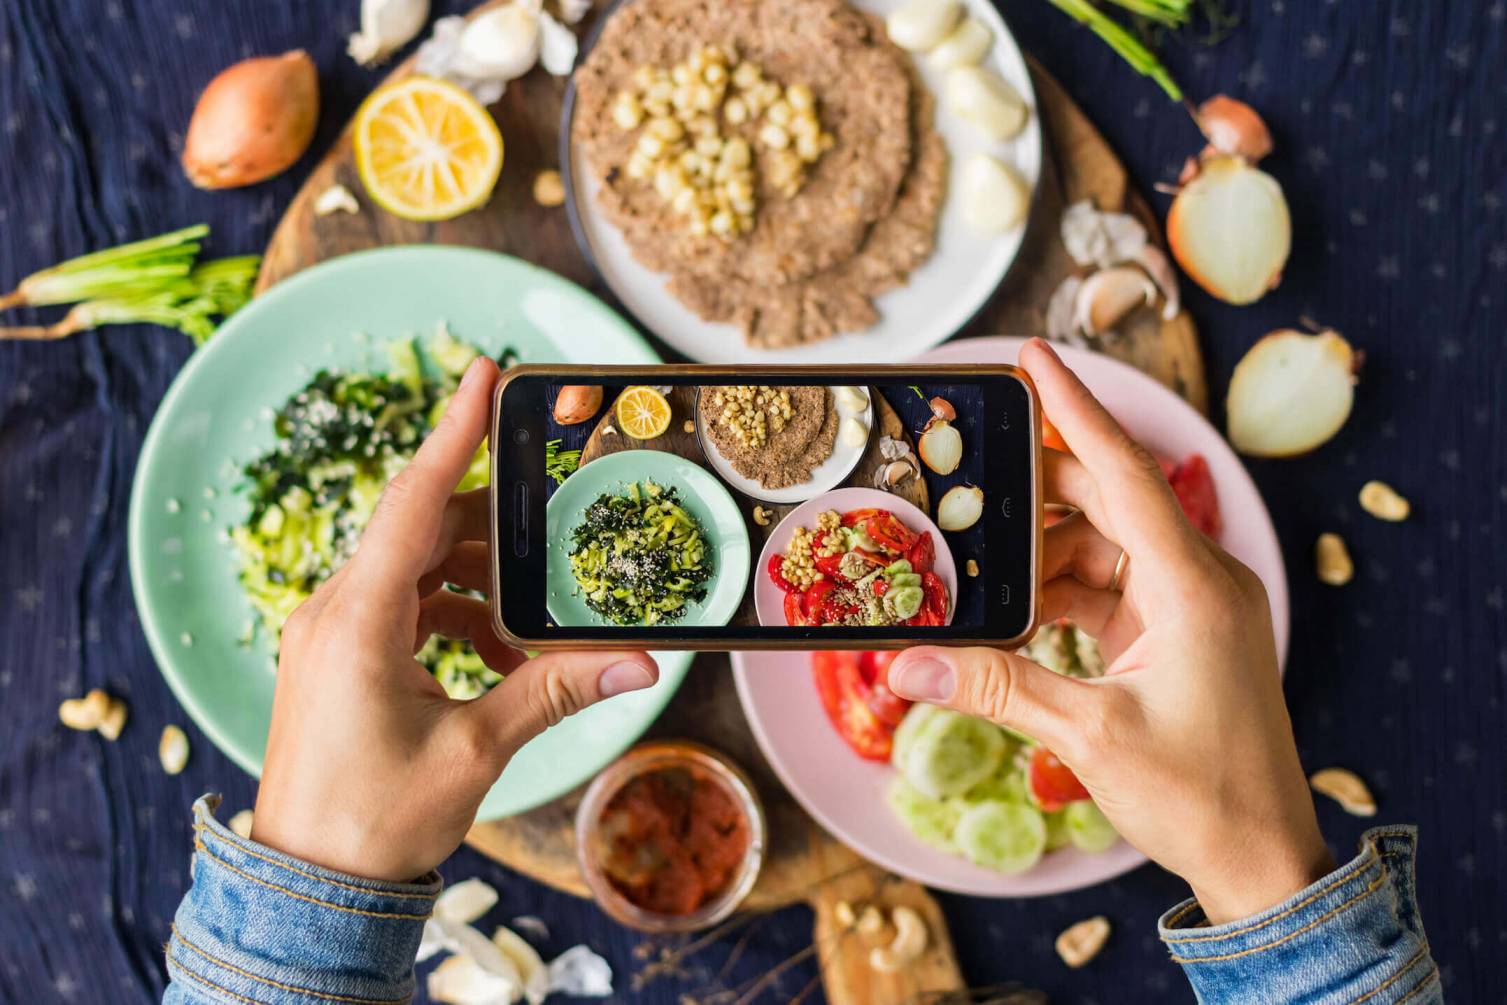 What is a Food Influencer?